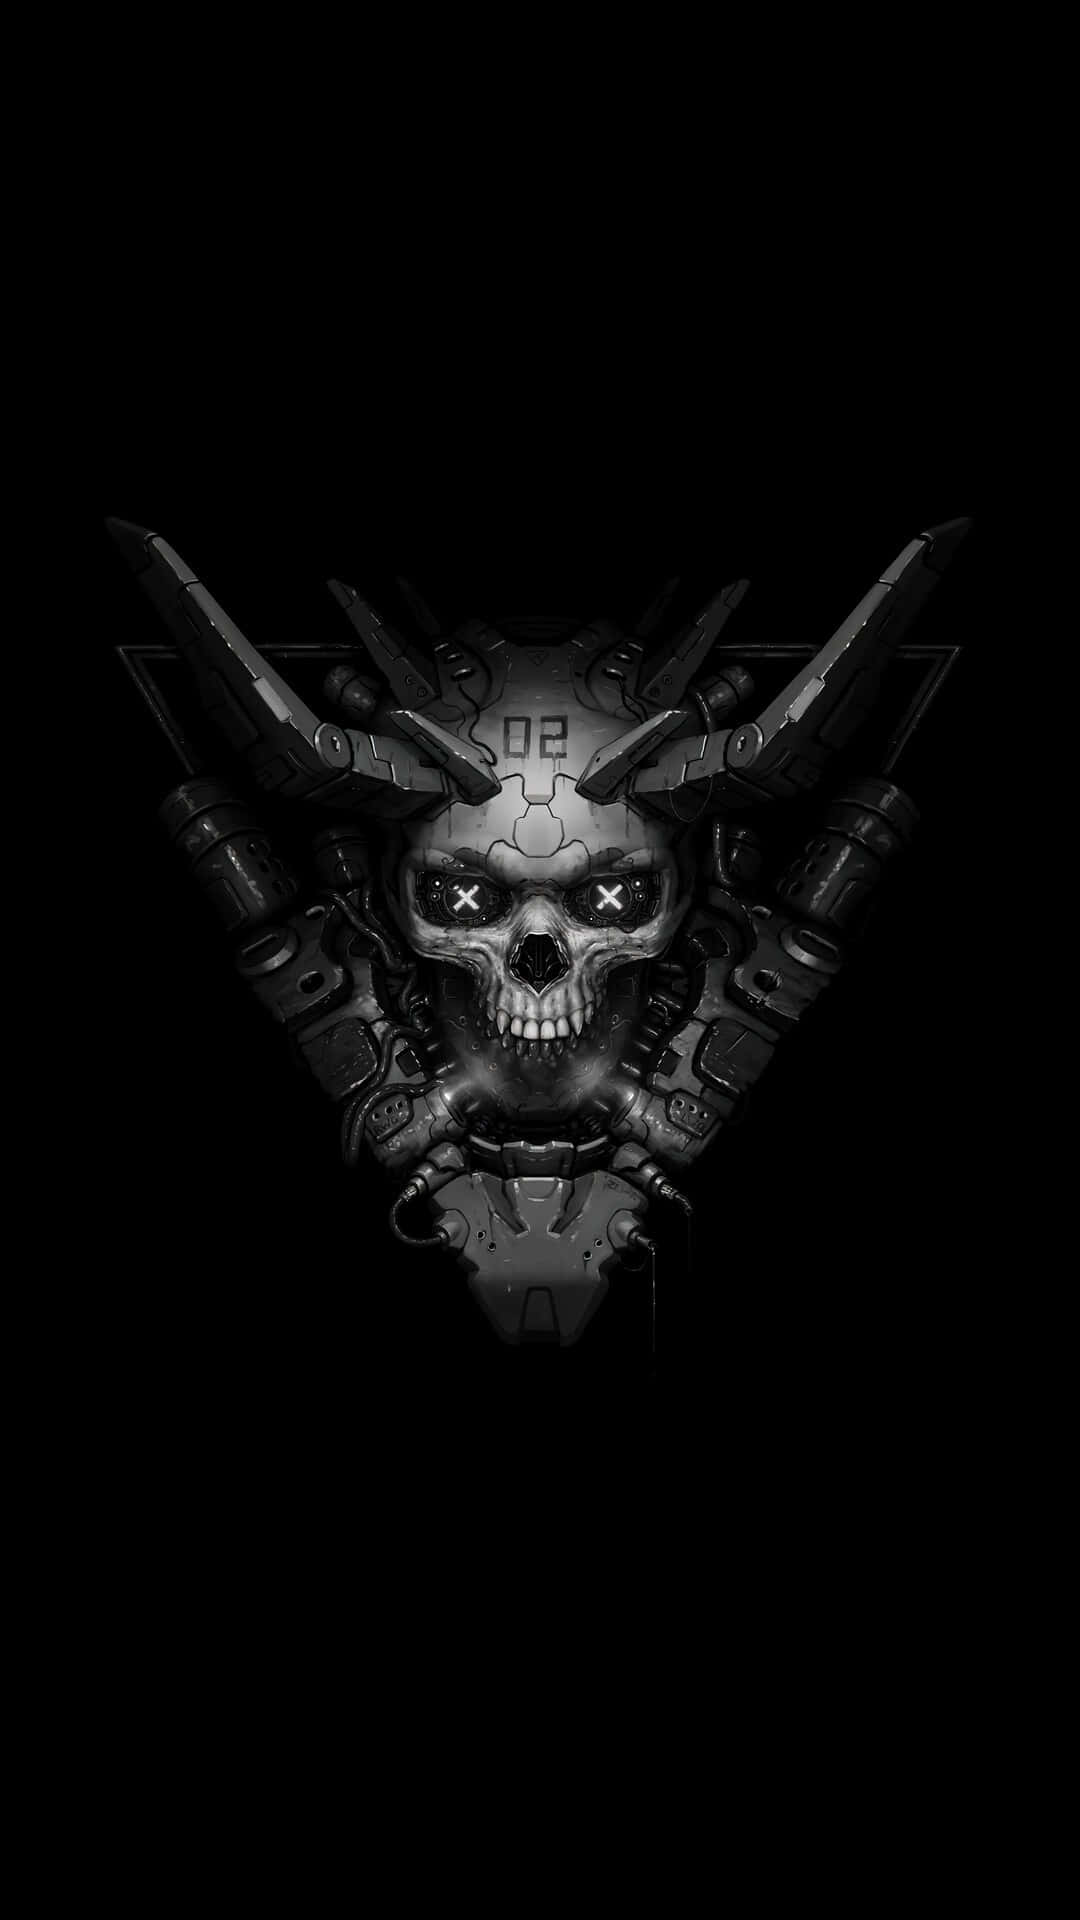 A Skull And Two Crossed Bones Against A Black Background Background